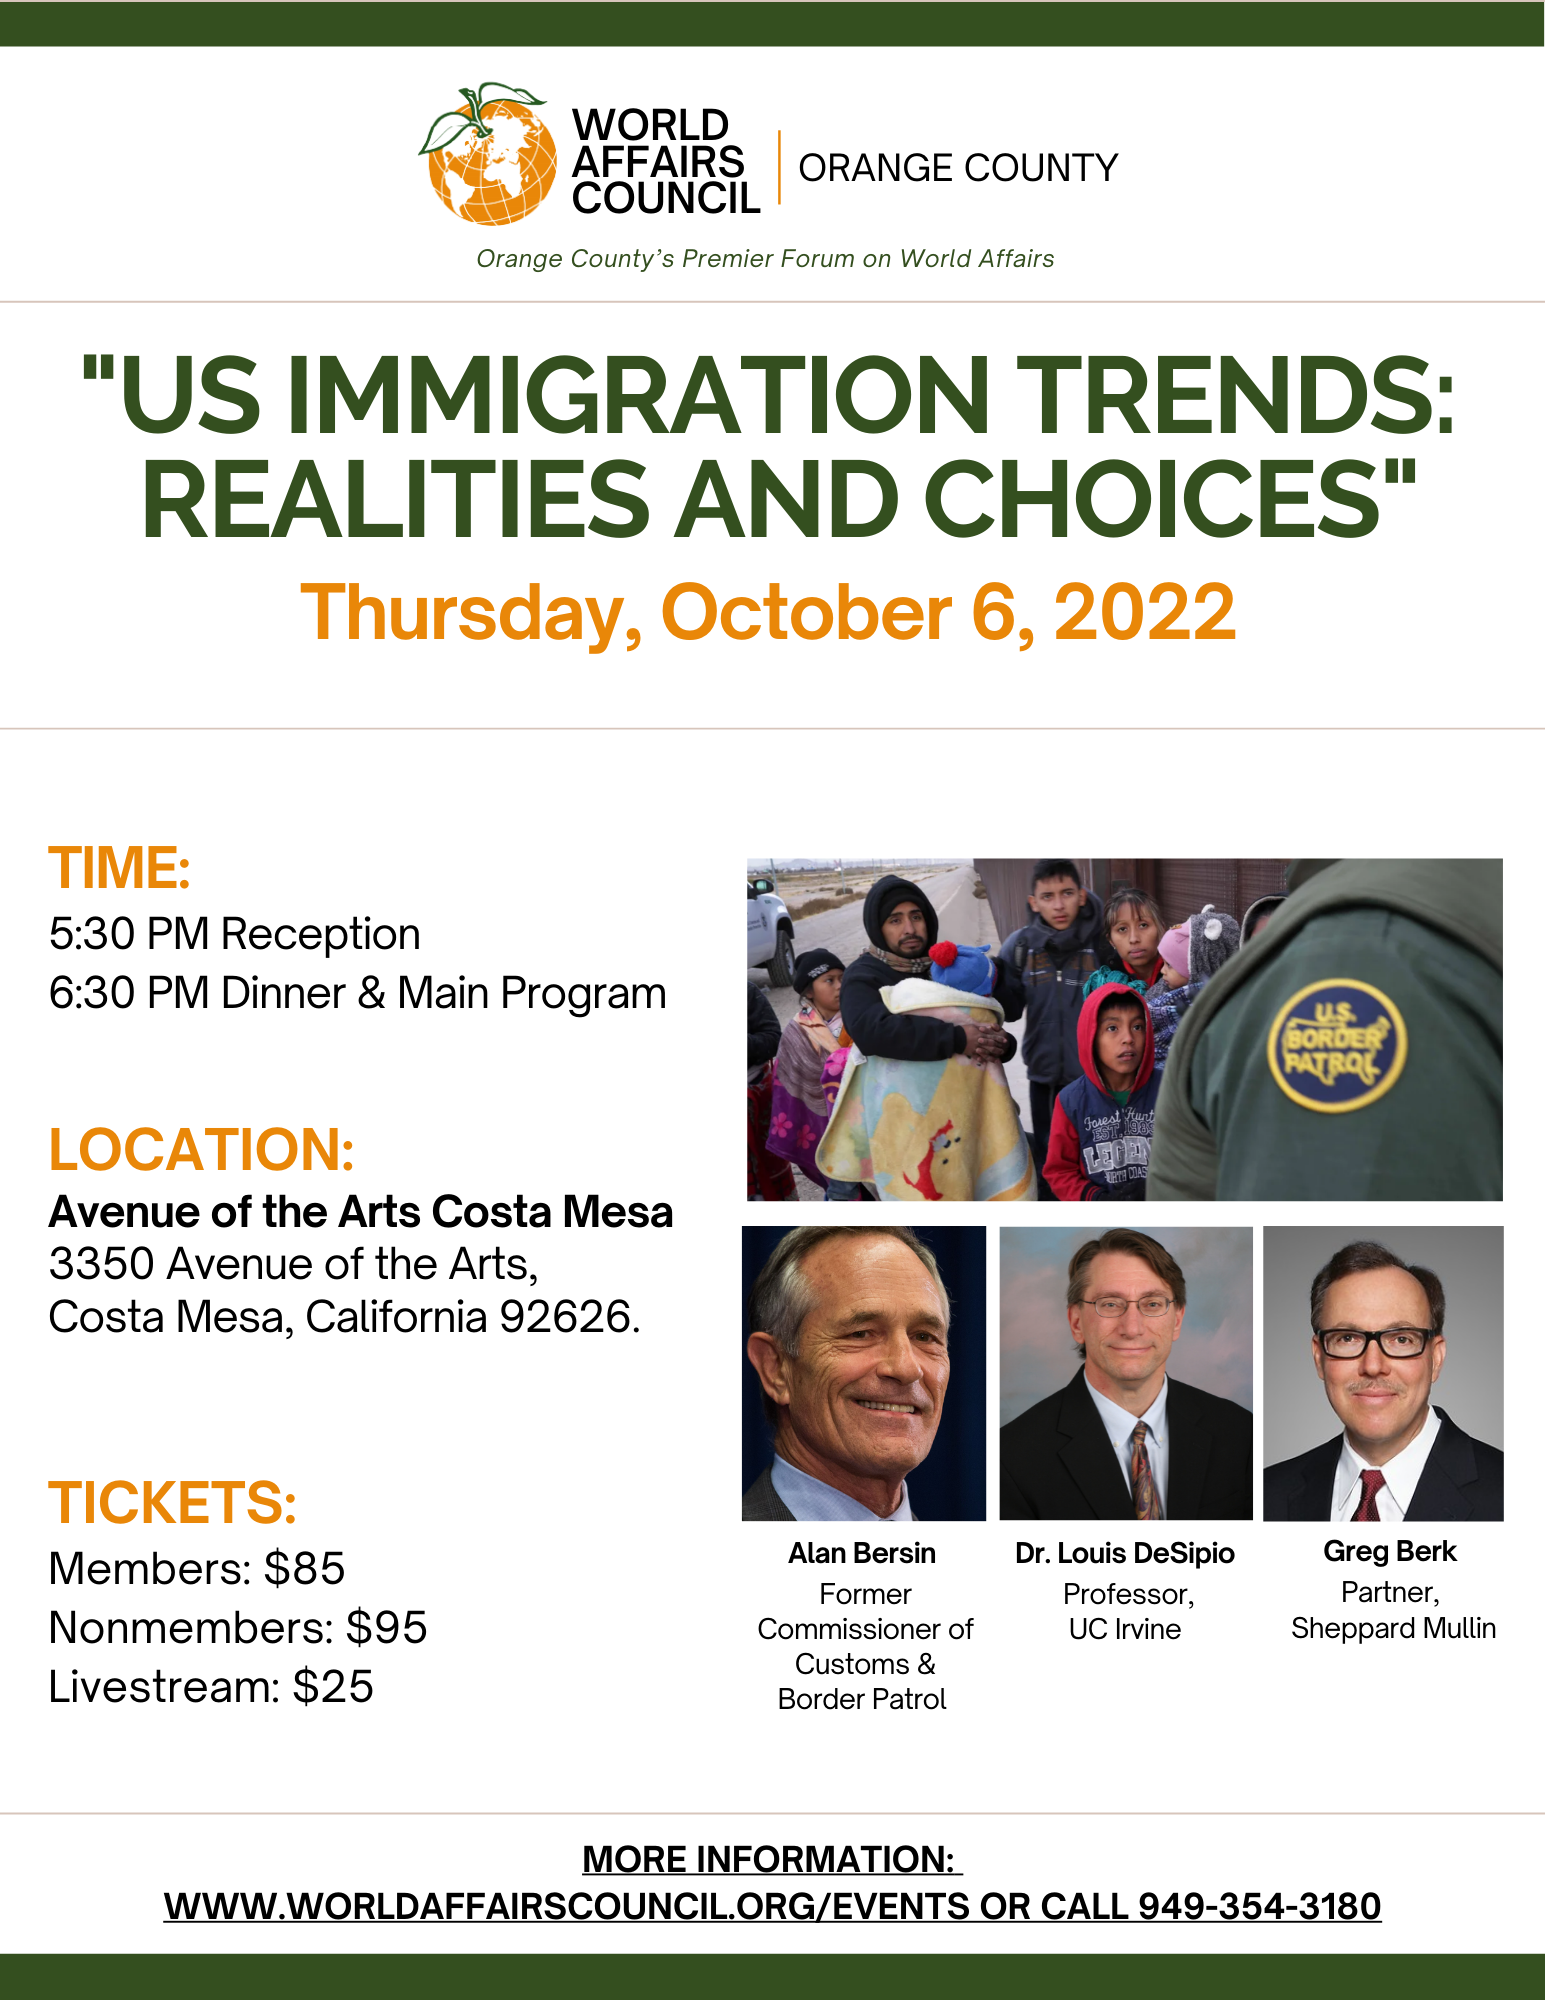 "US Immigration Trends: Realities and Choices" with Alan Bersin, Dr. Louis Desipio, & Greg Berk